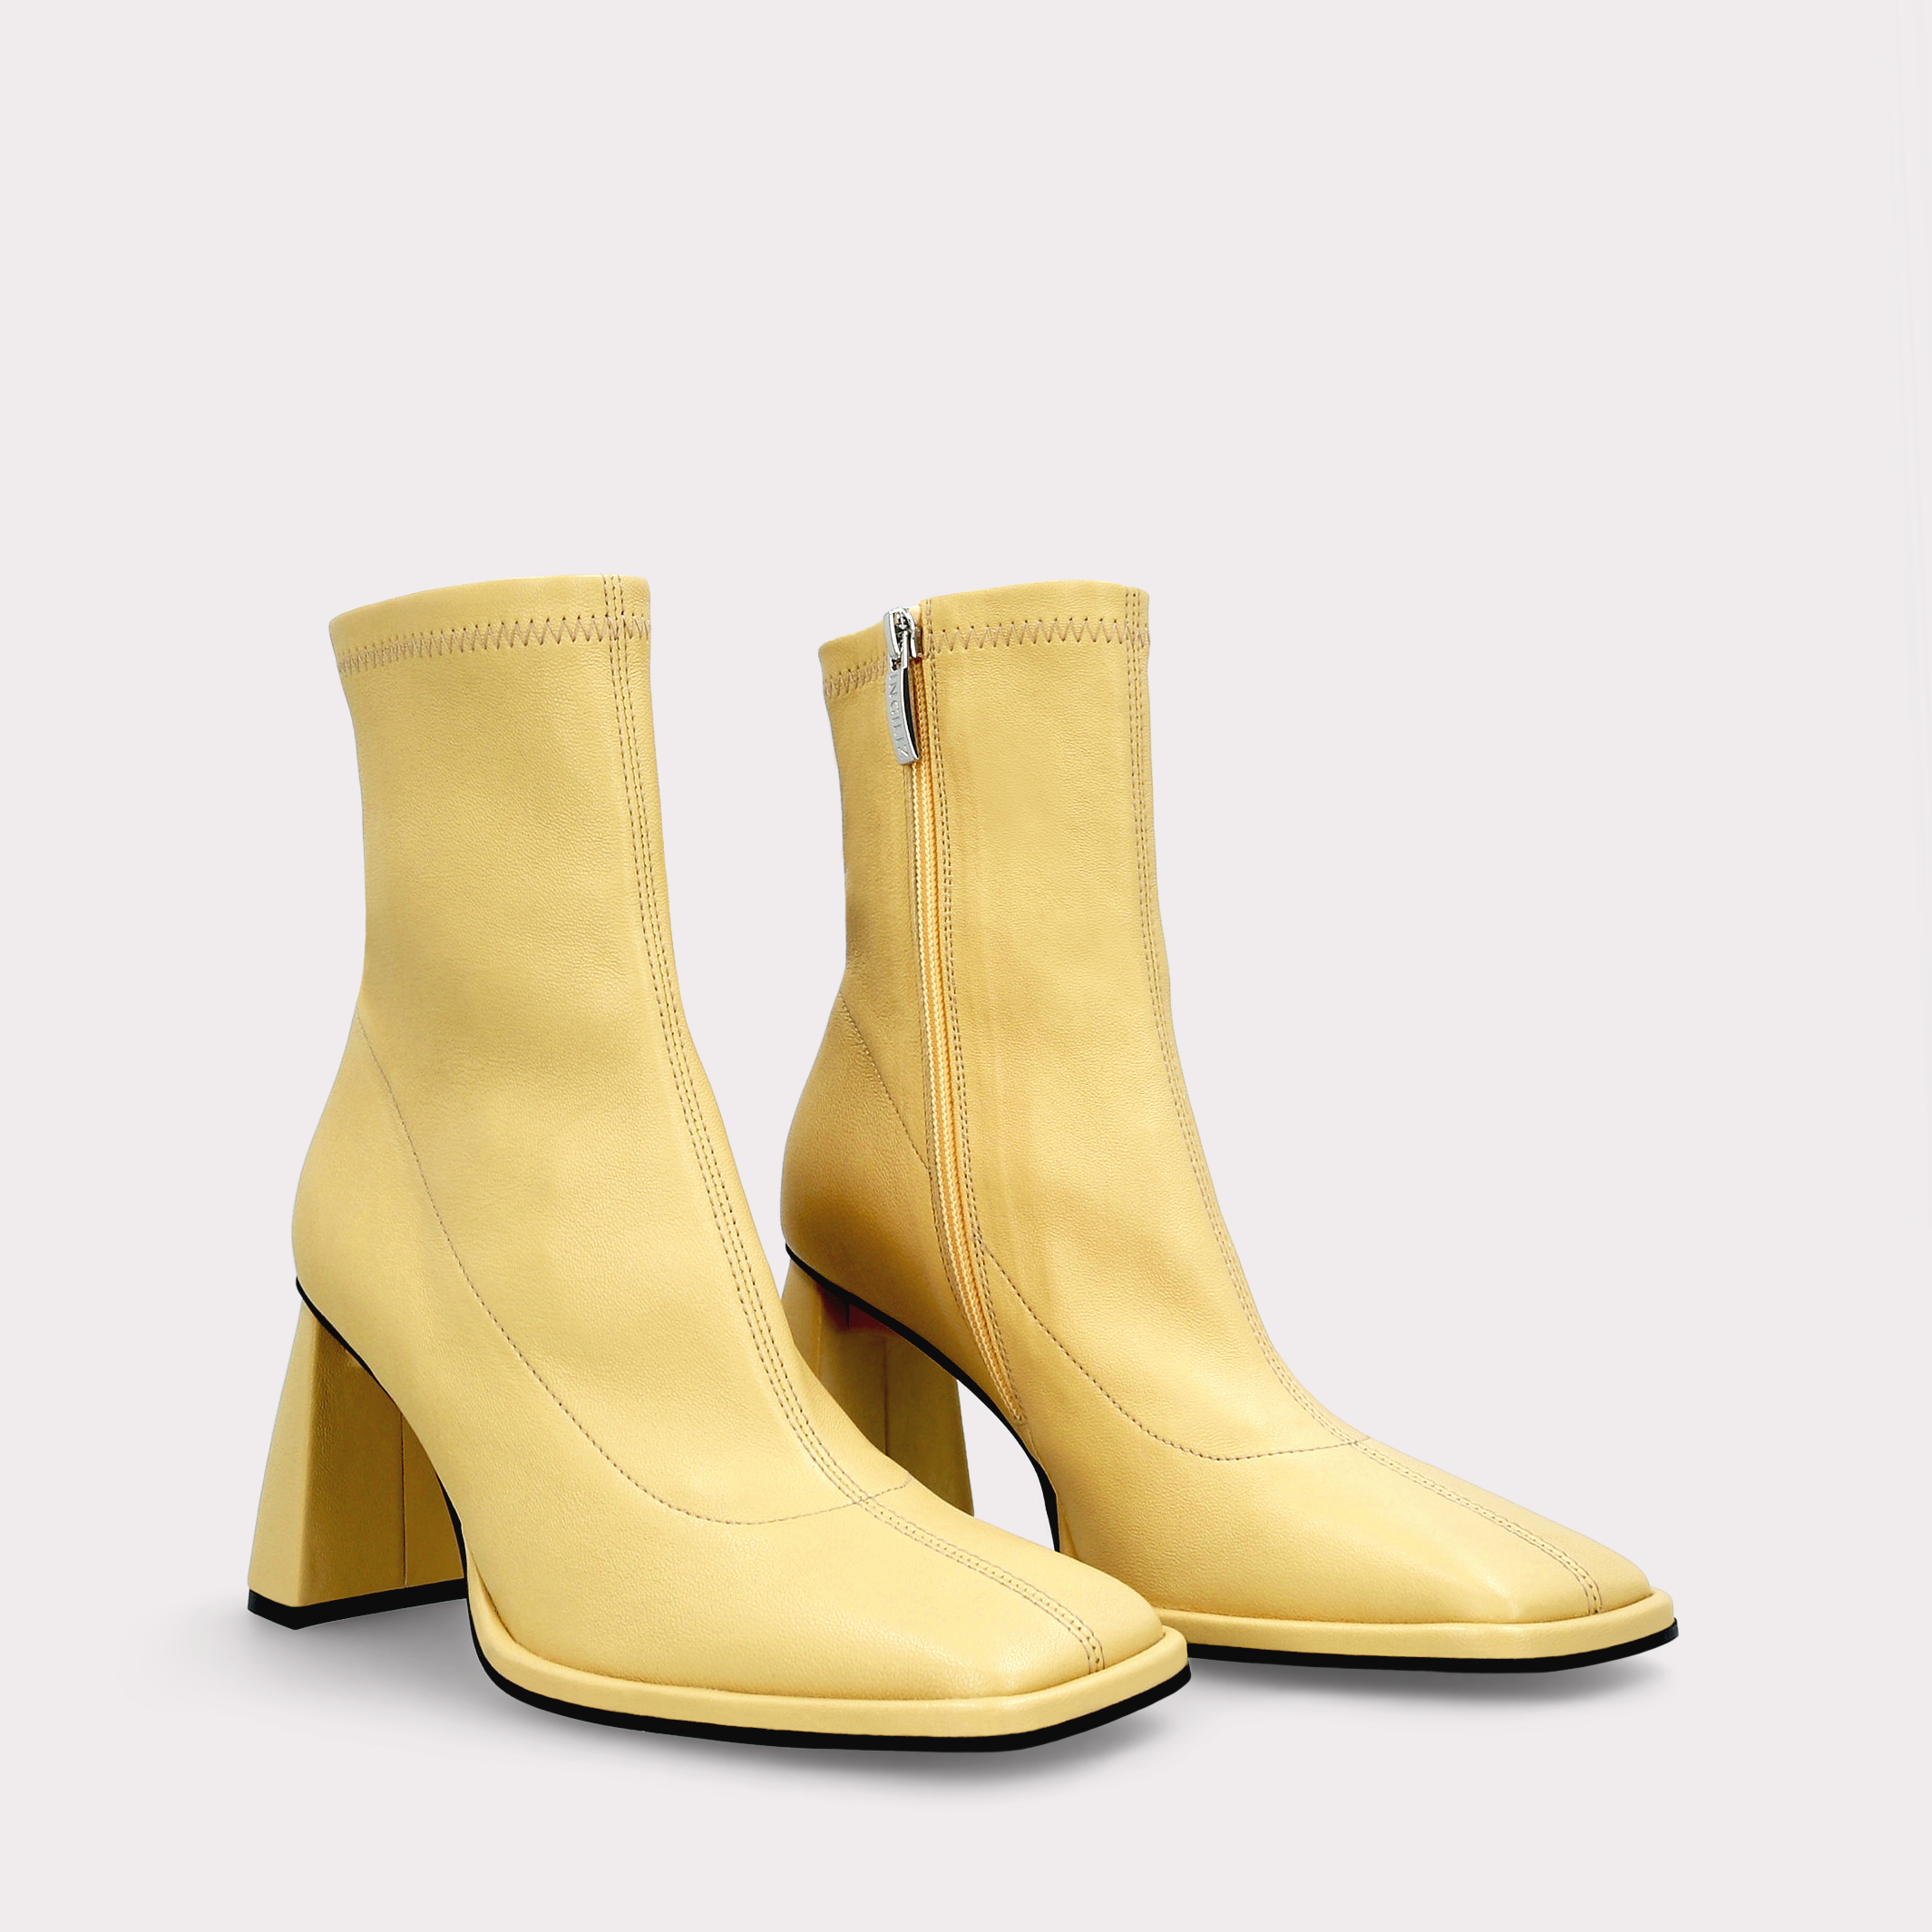 BRENTA 01 PASTEL YELLOW STRETCH LEATHER ANKLE BOOTS